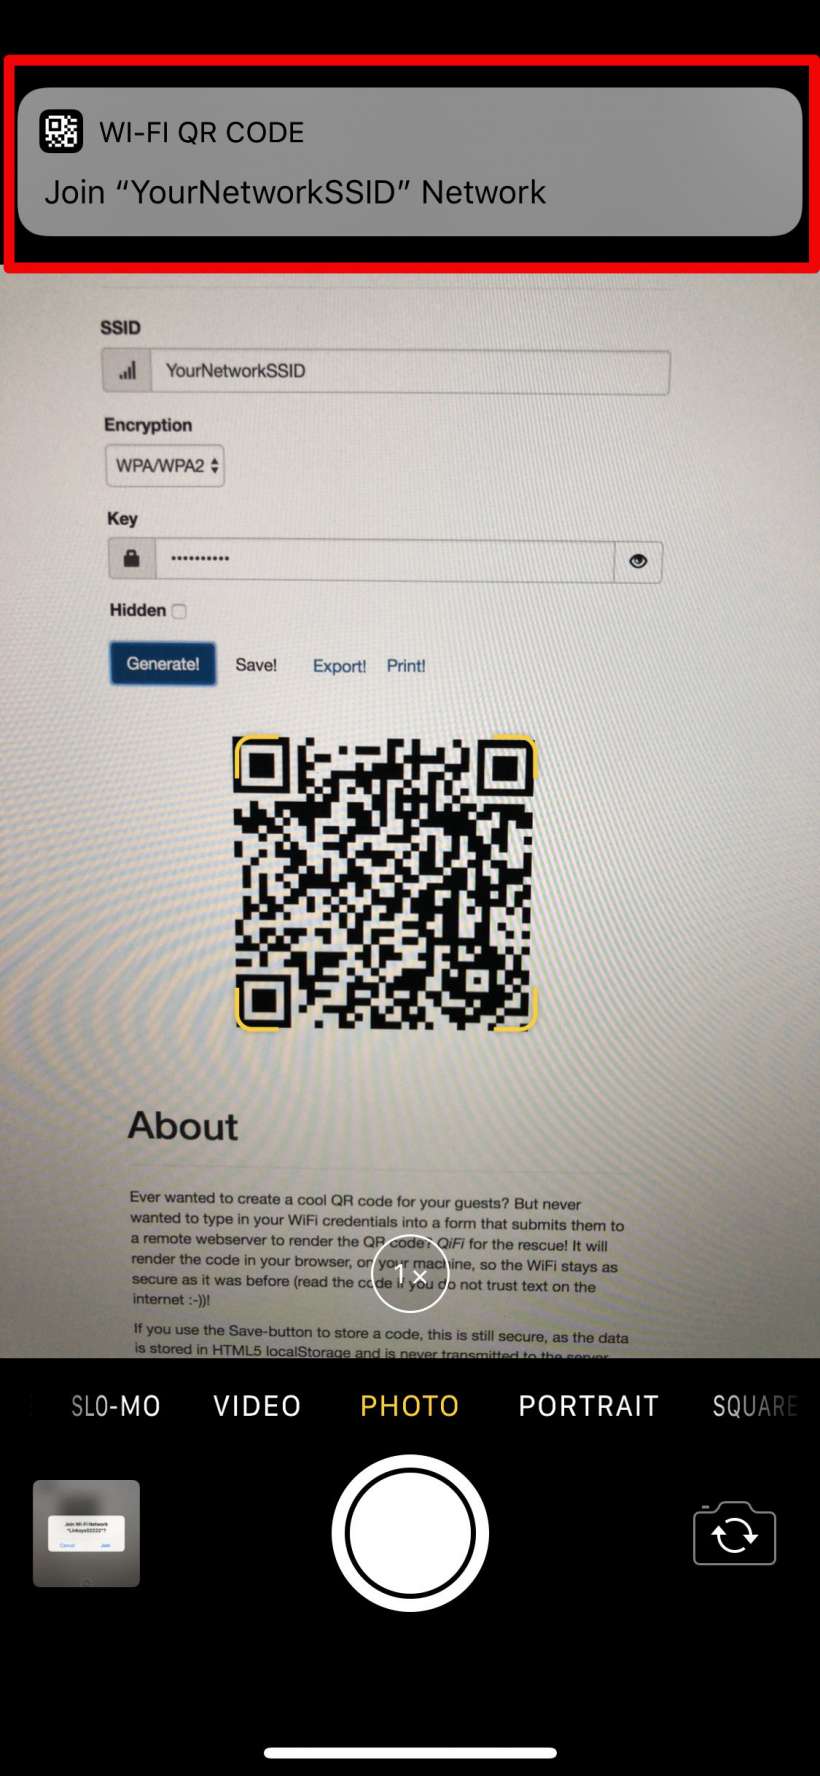 How to create a QR code for your WiFi network.